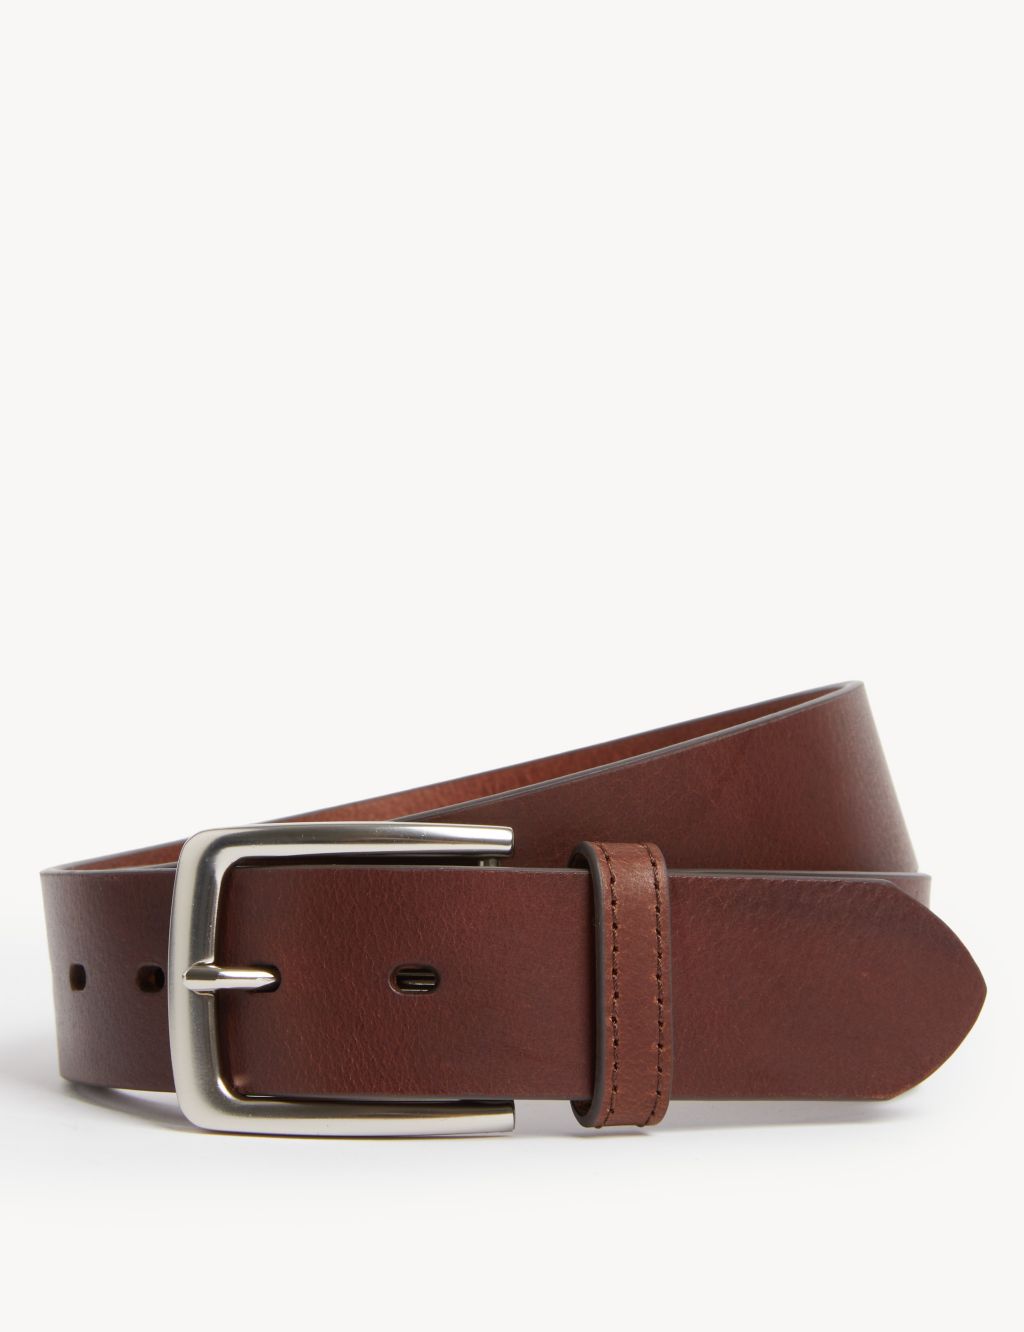 Leather Casual Belt image 1